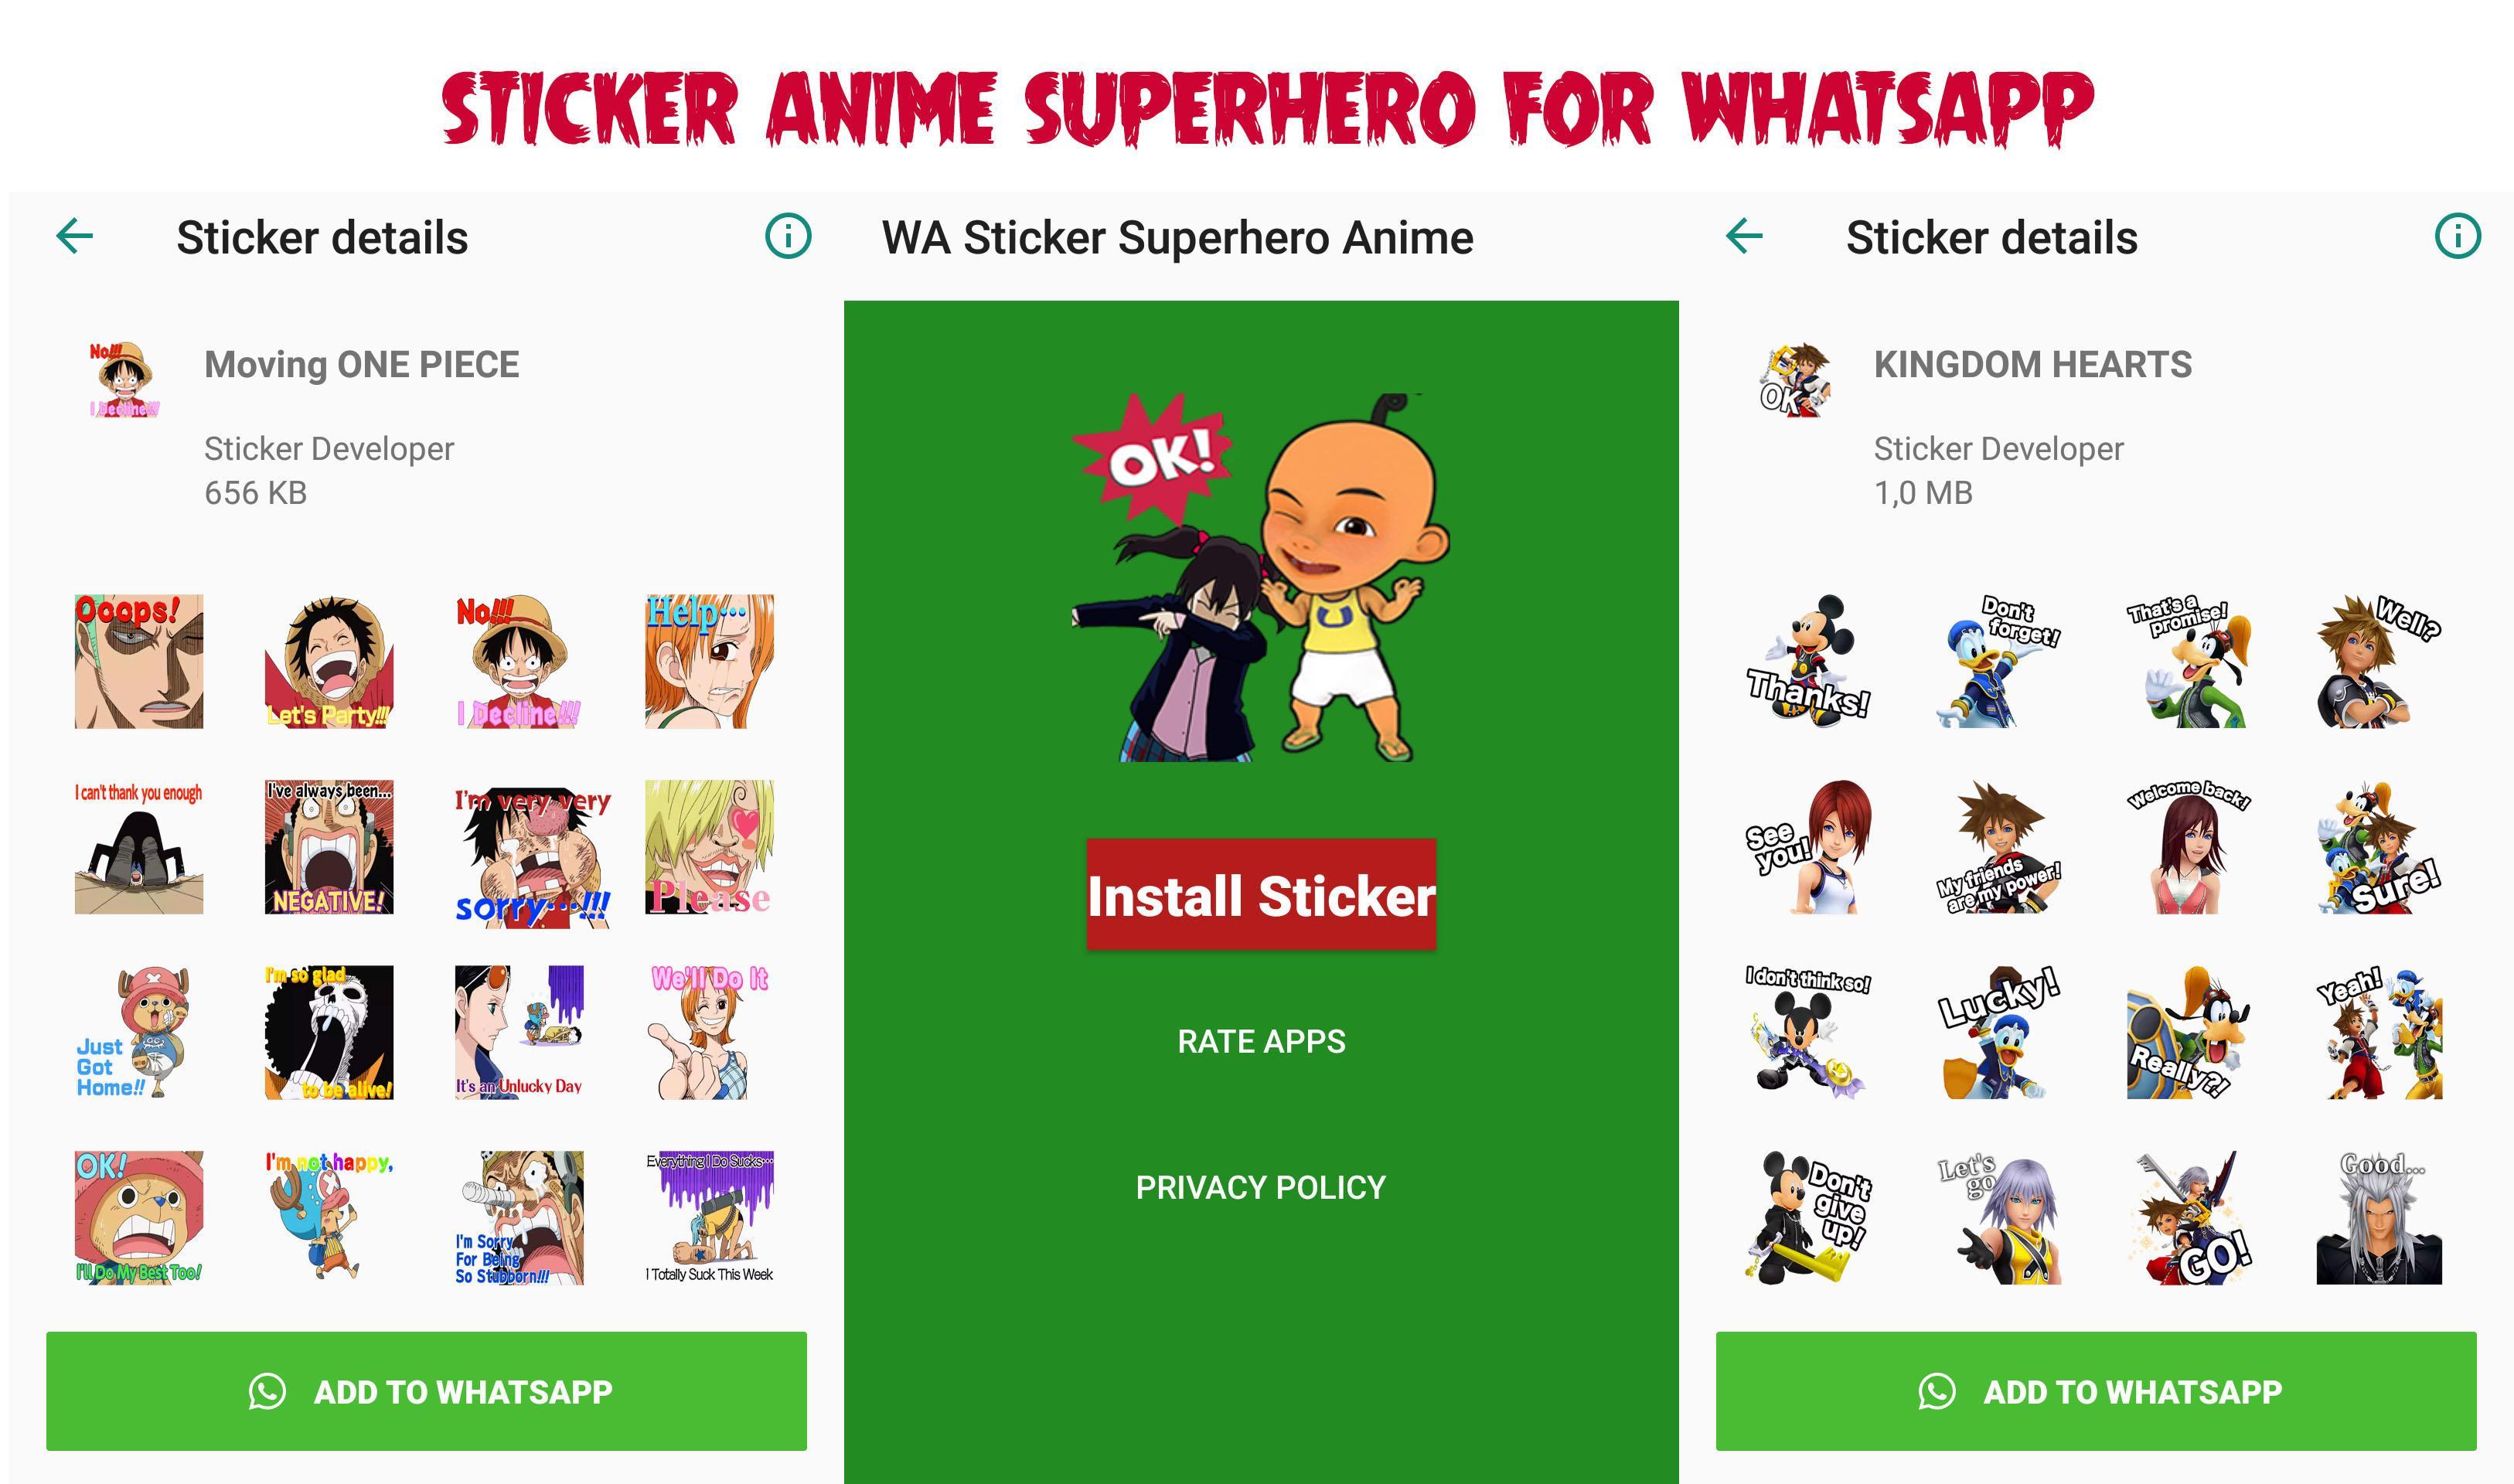 Wa Sticker Anime Superhero For Whatsapp For Android Apk Download